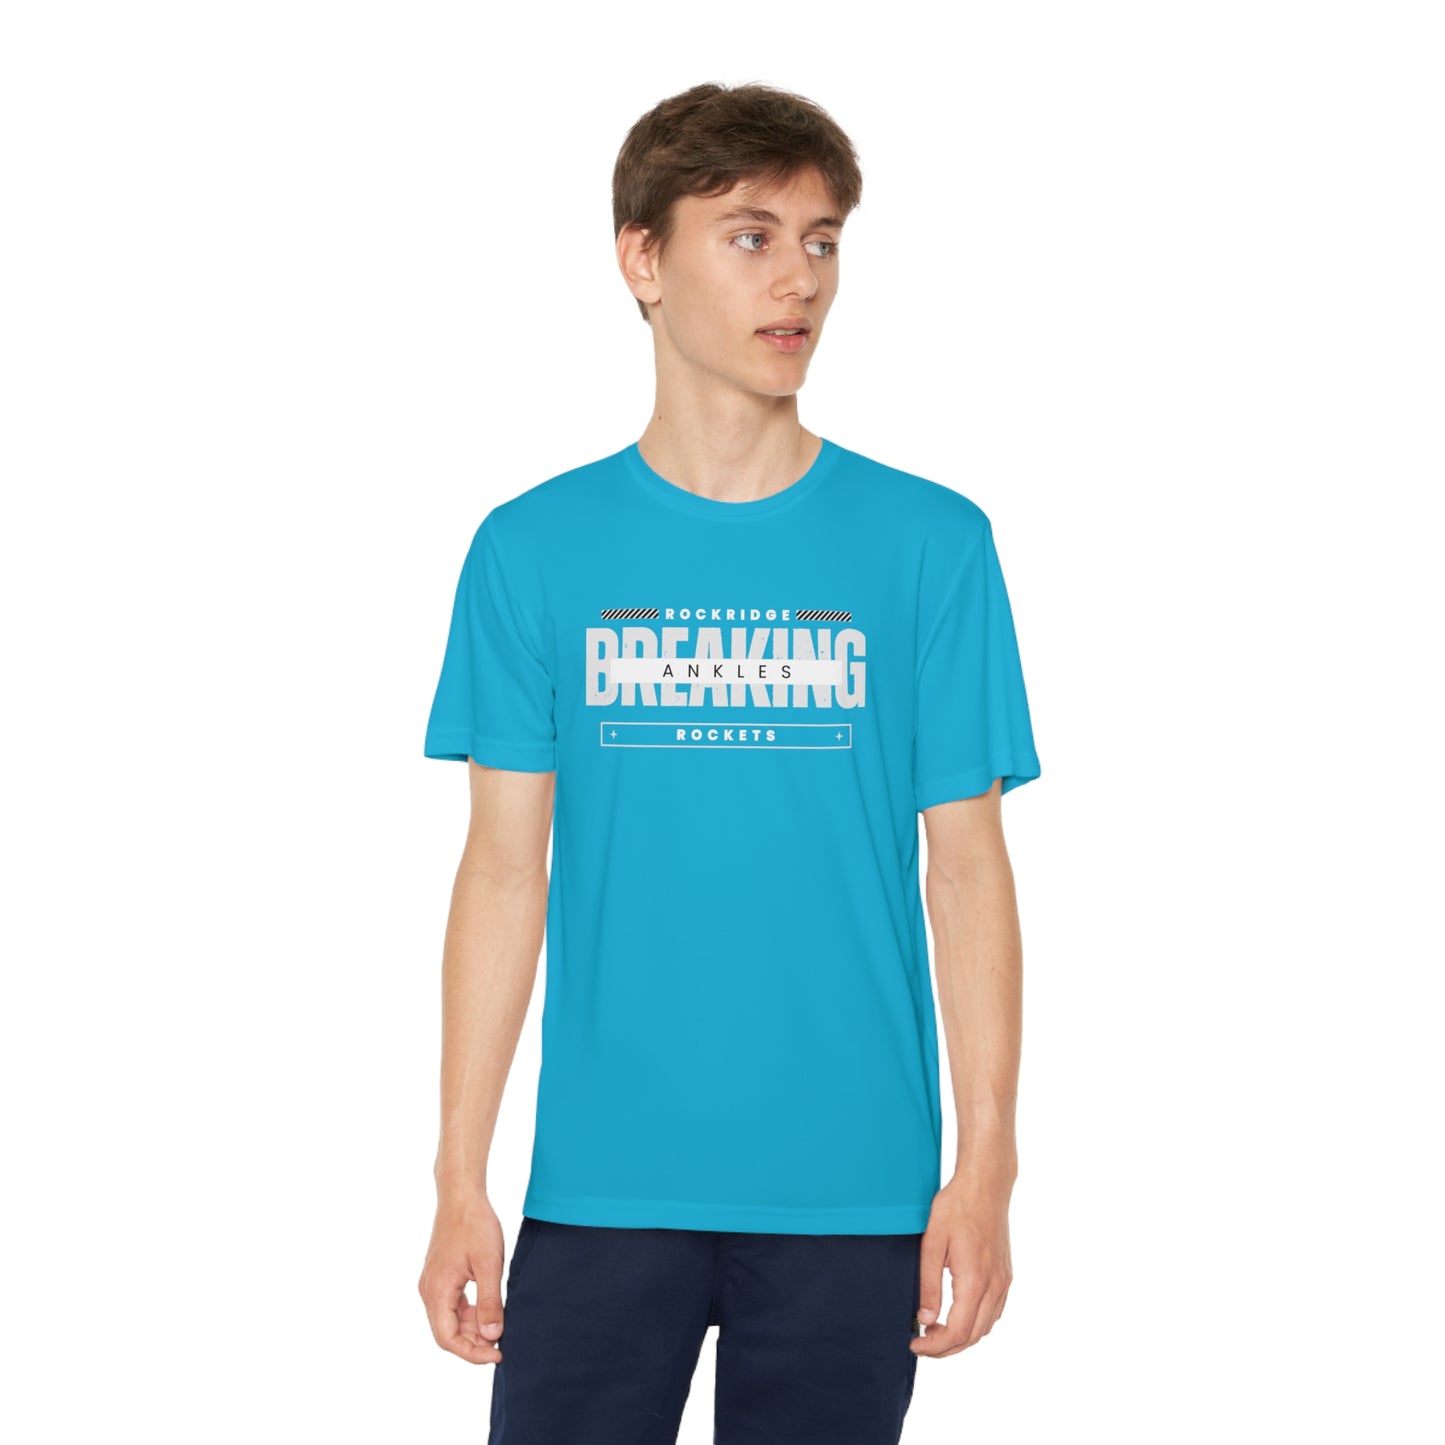 Breaking Ankles - Rockridge Rockets, Youth Competitor Tee